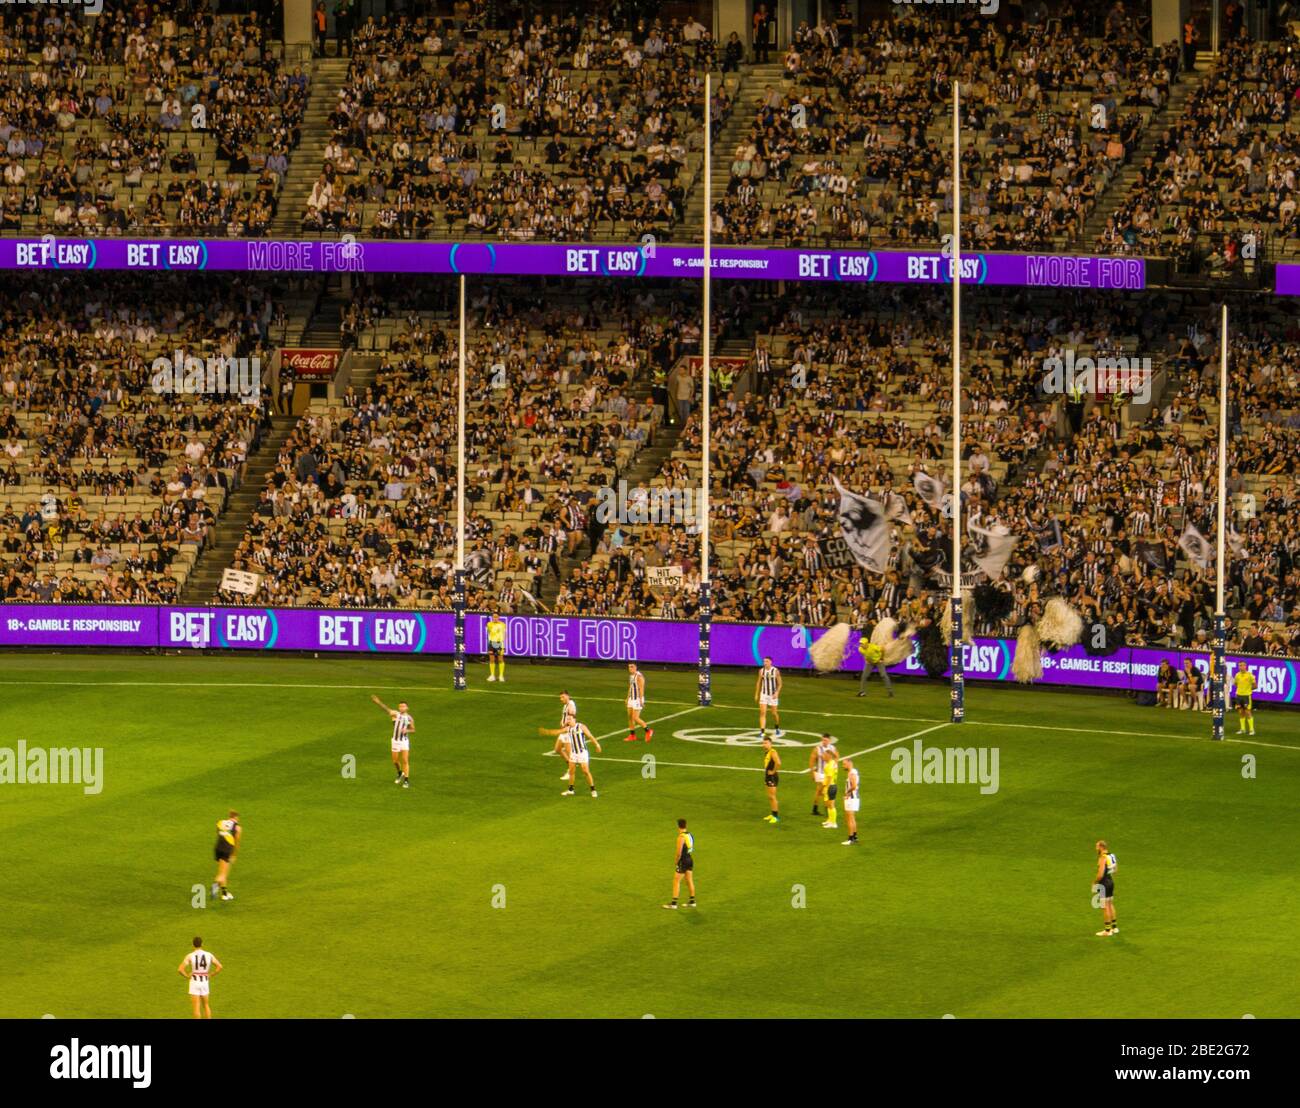 Australian football playing at Melbourne Cricket Ground Photo - Alamy